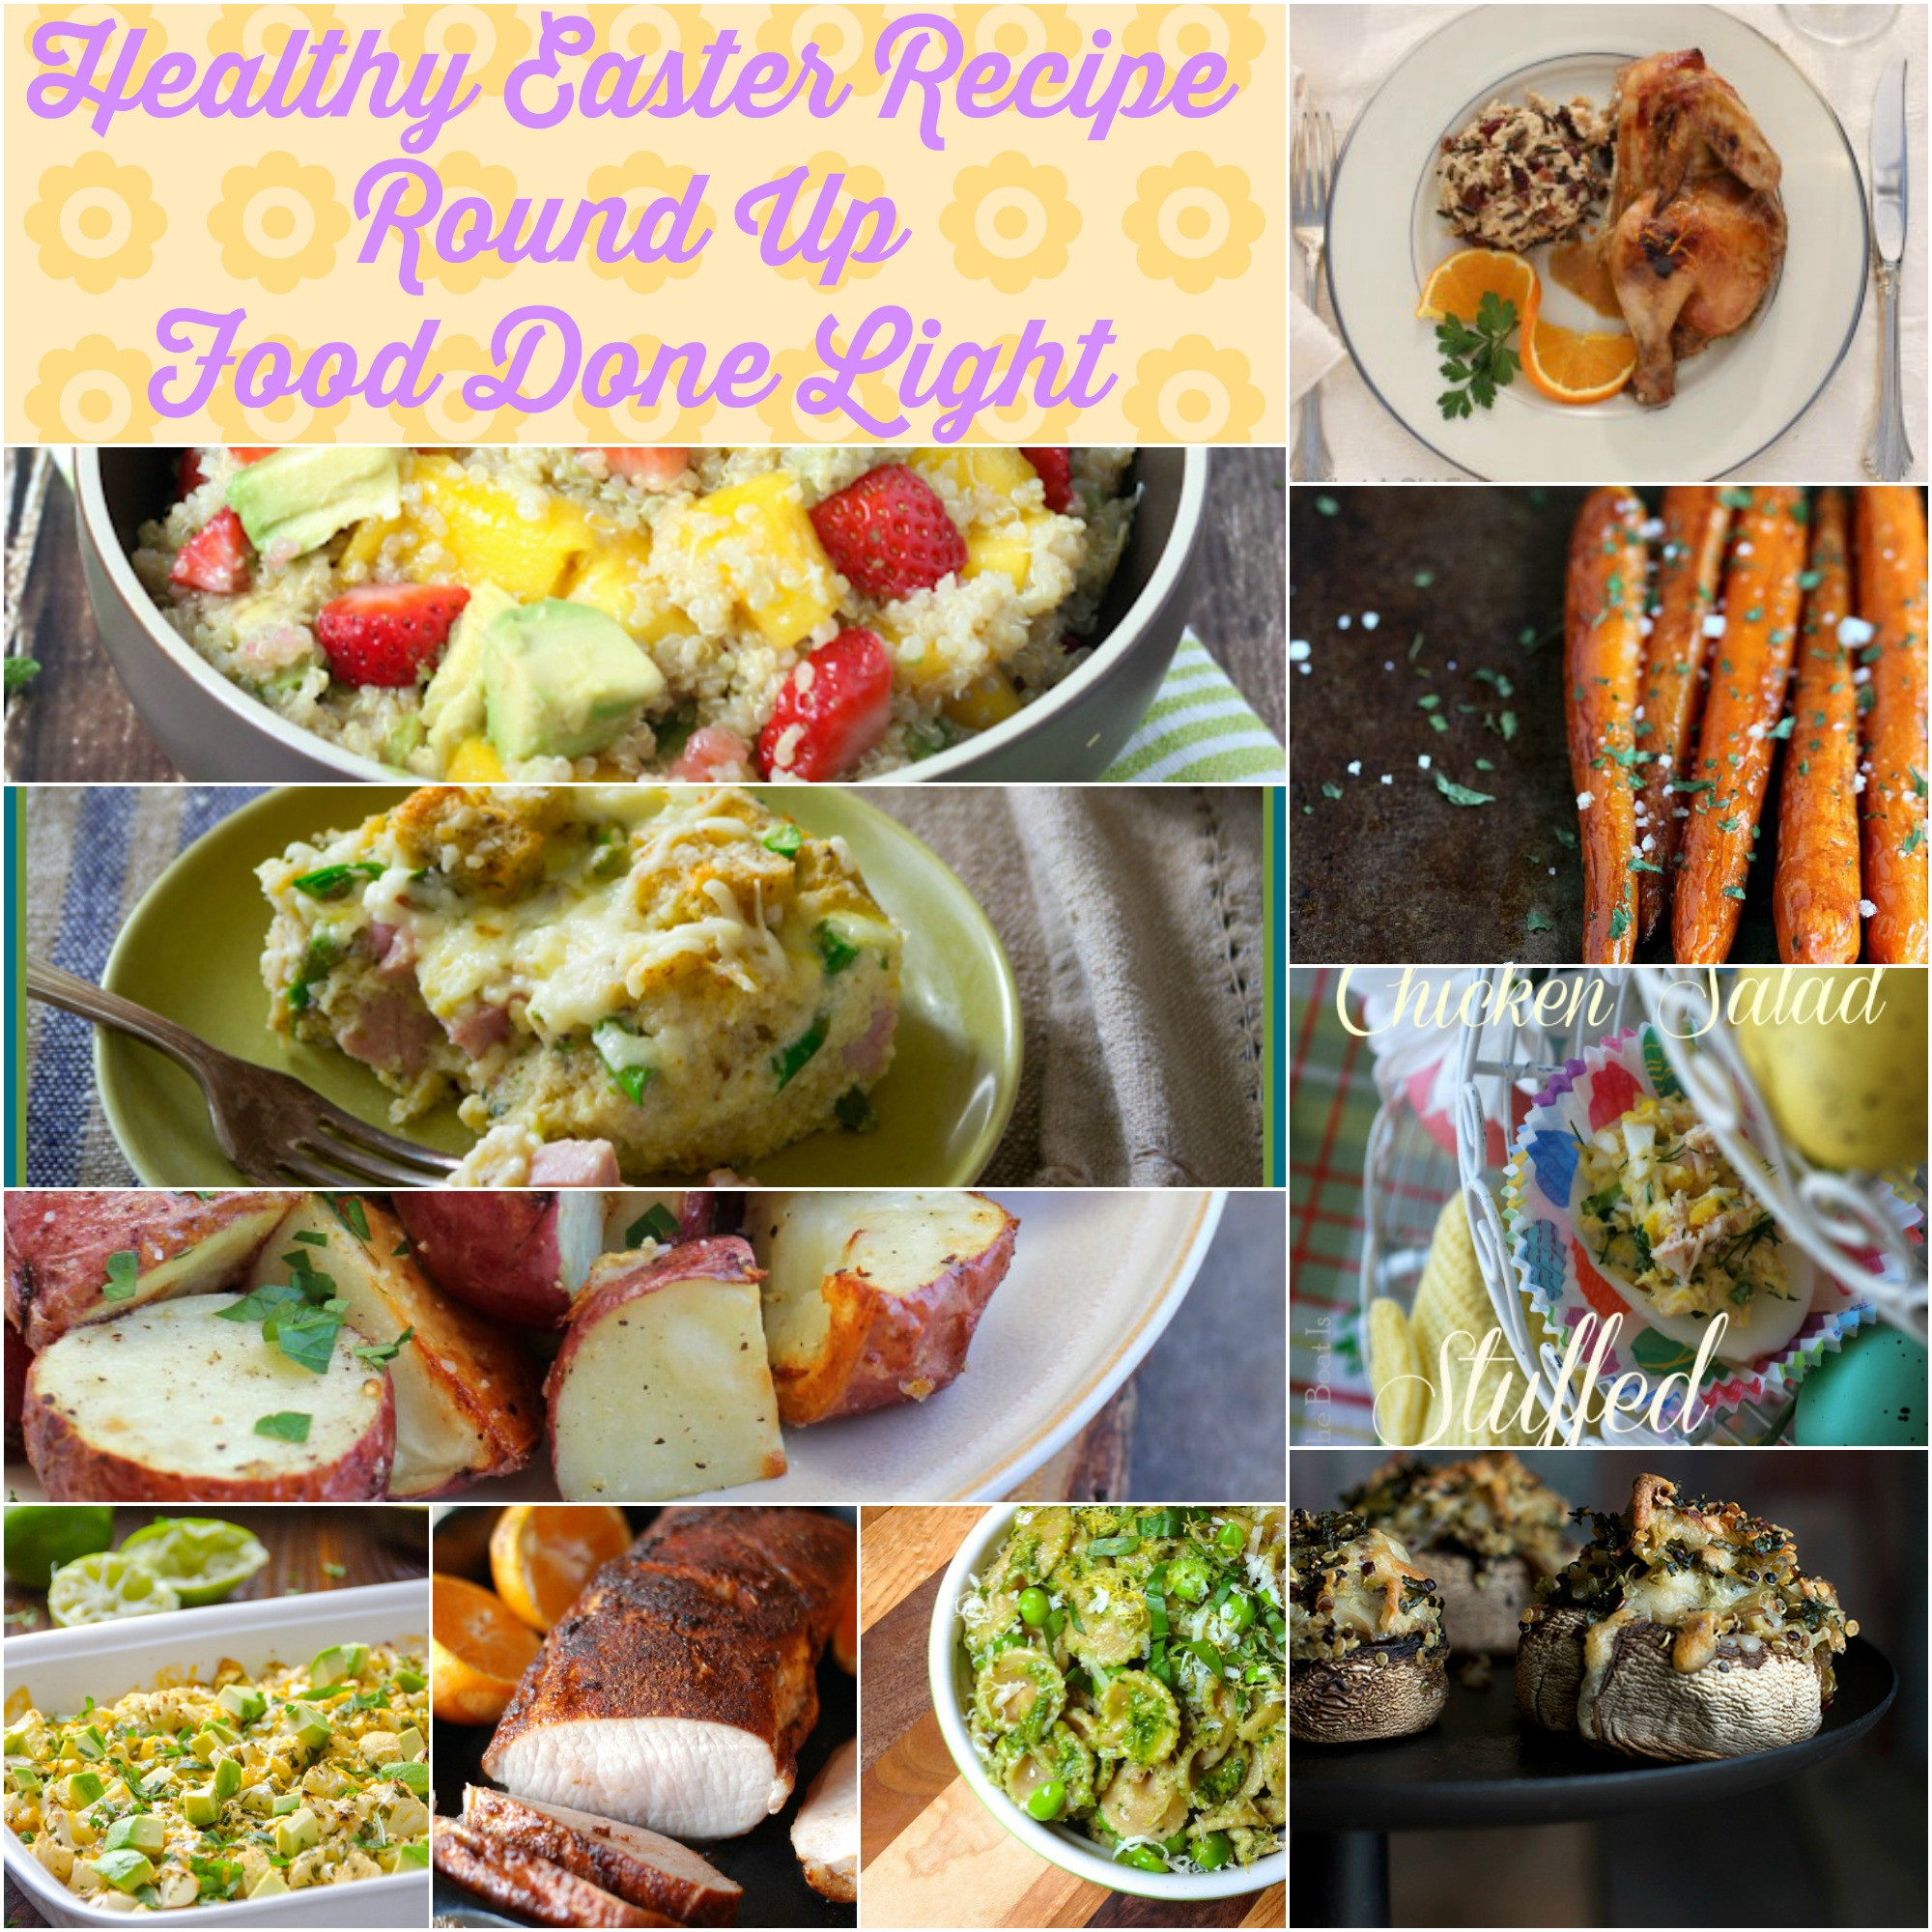 Easter Dinner Recipe
 Healthy Easter Recipe Round Up Food Done Light